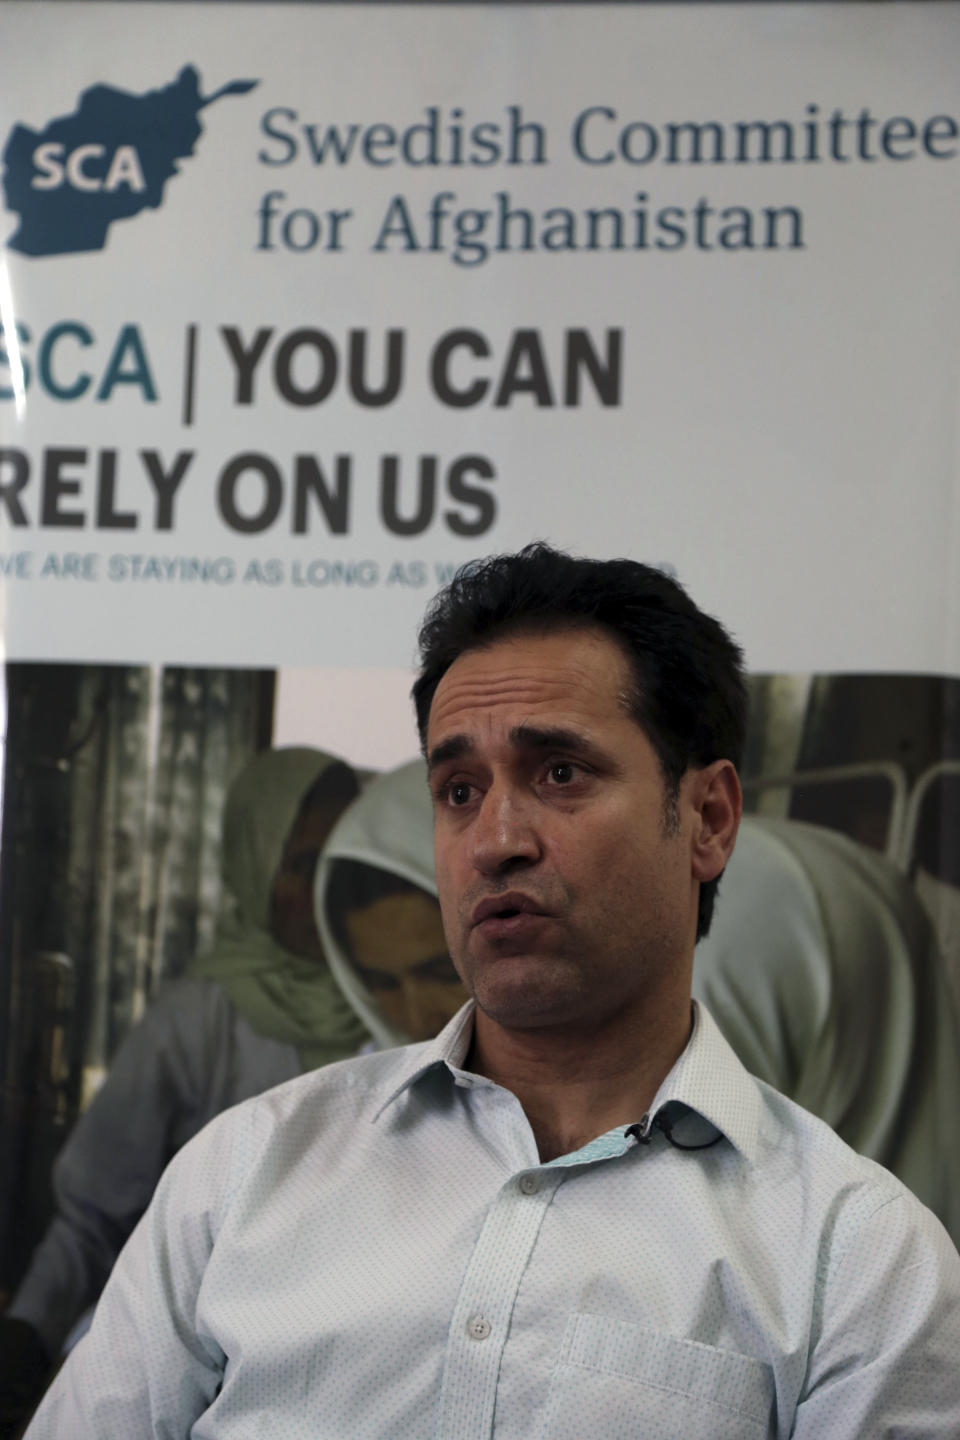 Ahmad Khalid Fahim, program director for the Swedish group, speaks during an interview with the Associated Press in Kabul, Afghanistan, Wednesday, July 17, 2019. A Swedish non-governmental organization in Afghanistan says the Taliban have forced the closure of 42 health facilities run by the non-profit group in eastern Maidan Wardan province. (AP Photo/Rahmat Gul)